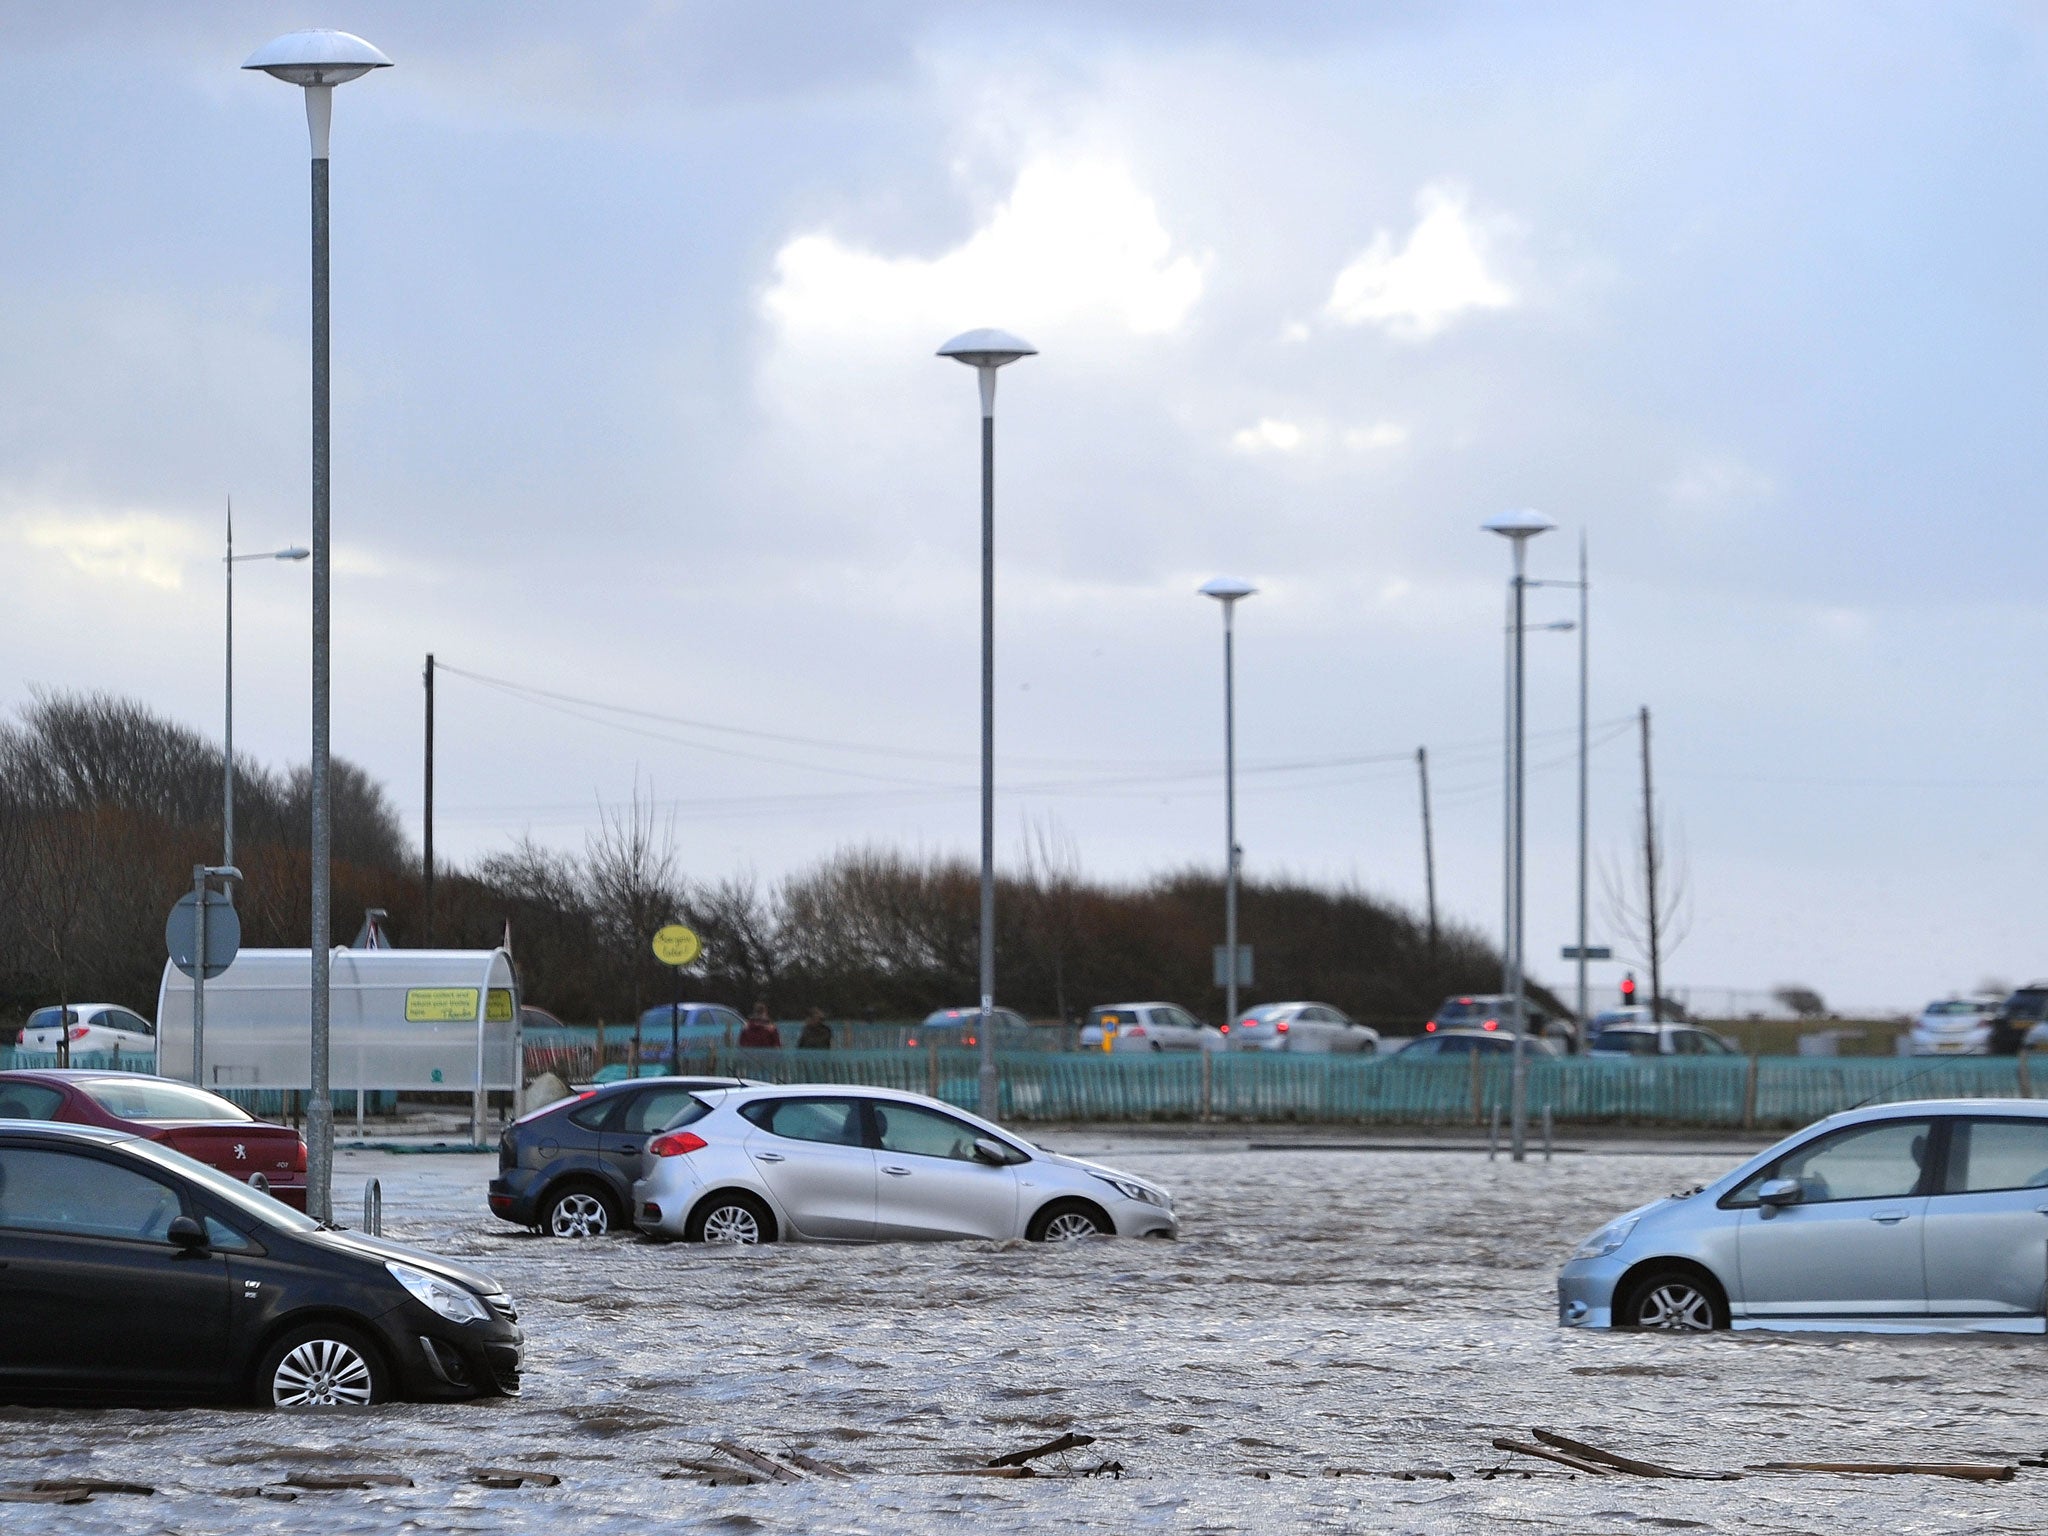 The recent storms marked the wettest winter on record